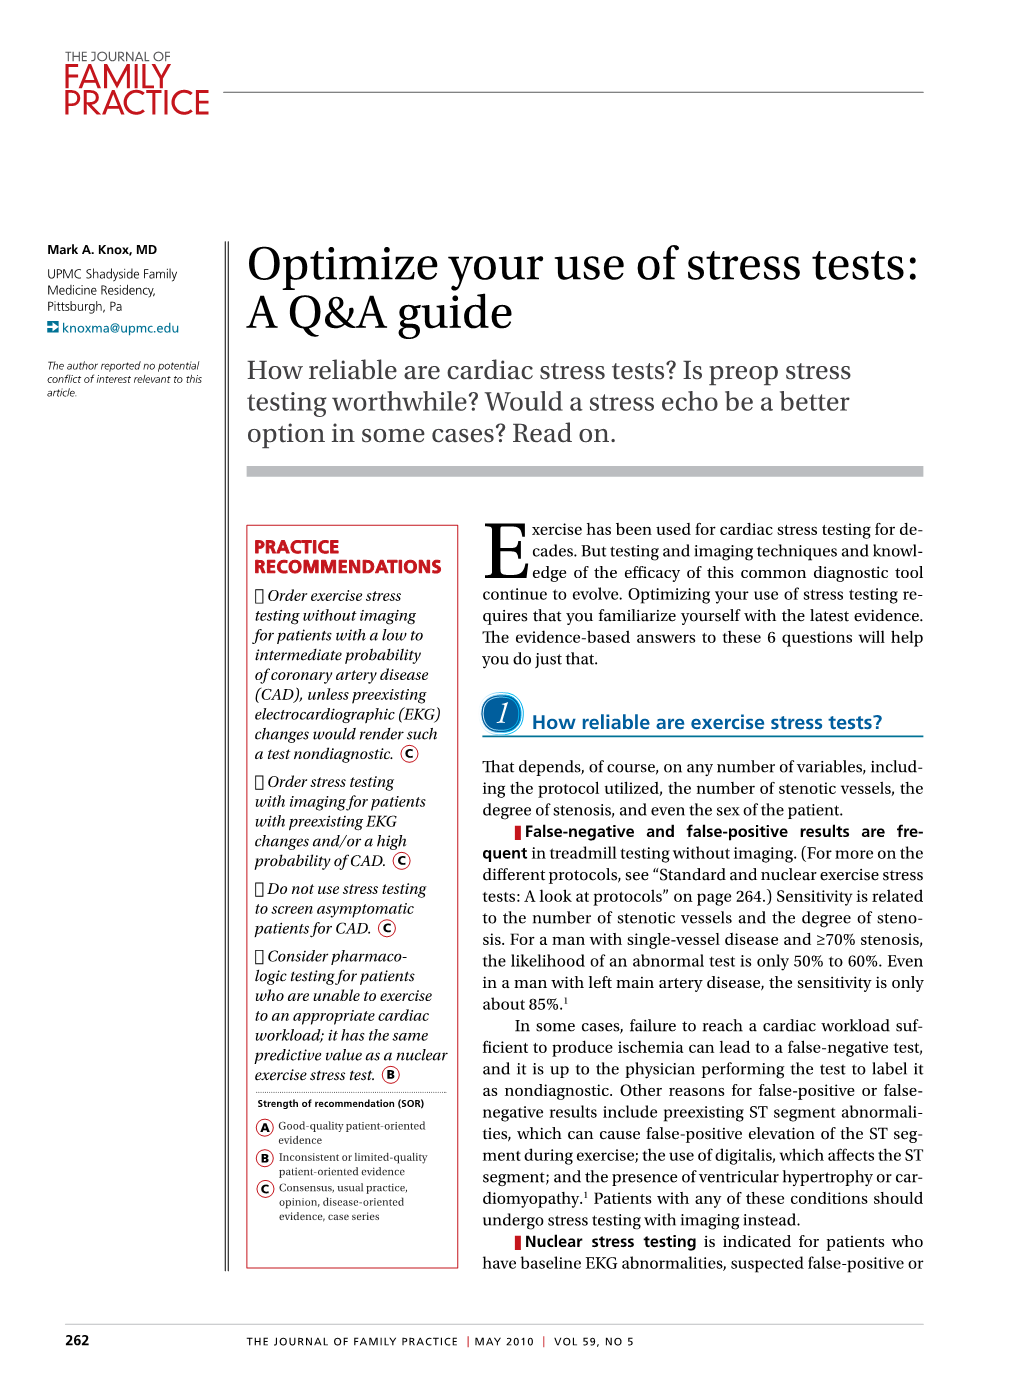 Optimize Your Use of Stress Tests: Medicine Residency, Pittsburgh, Pa Knoxma@Upmc.Edu a Q&A Guide